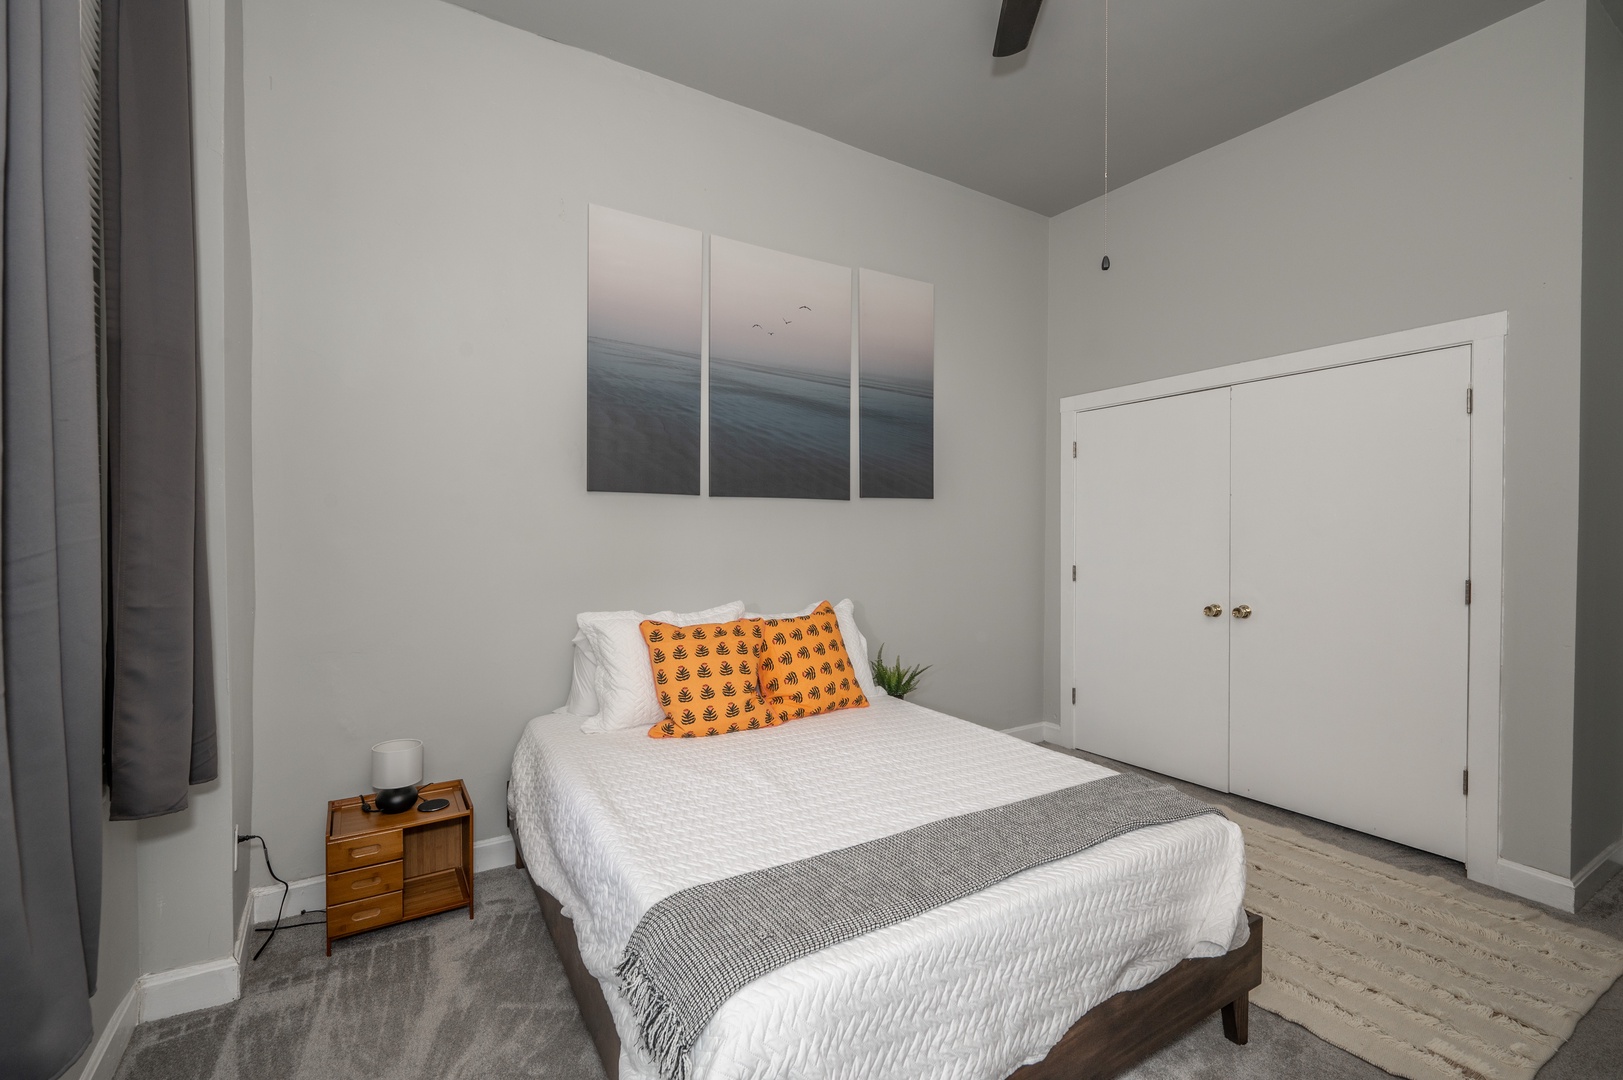 Unit 2: The 1st of 2 queen bedrooms offers a Smart TV & ceiling fan